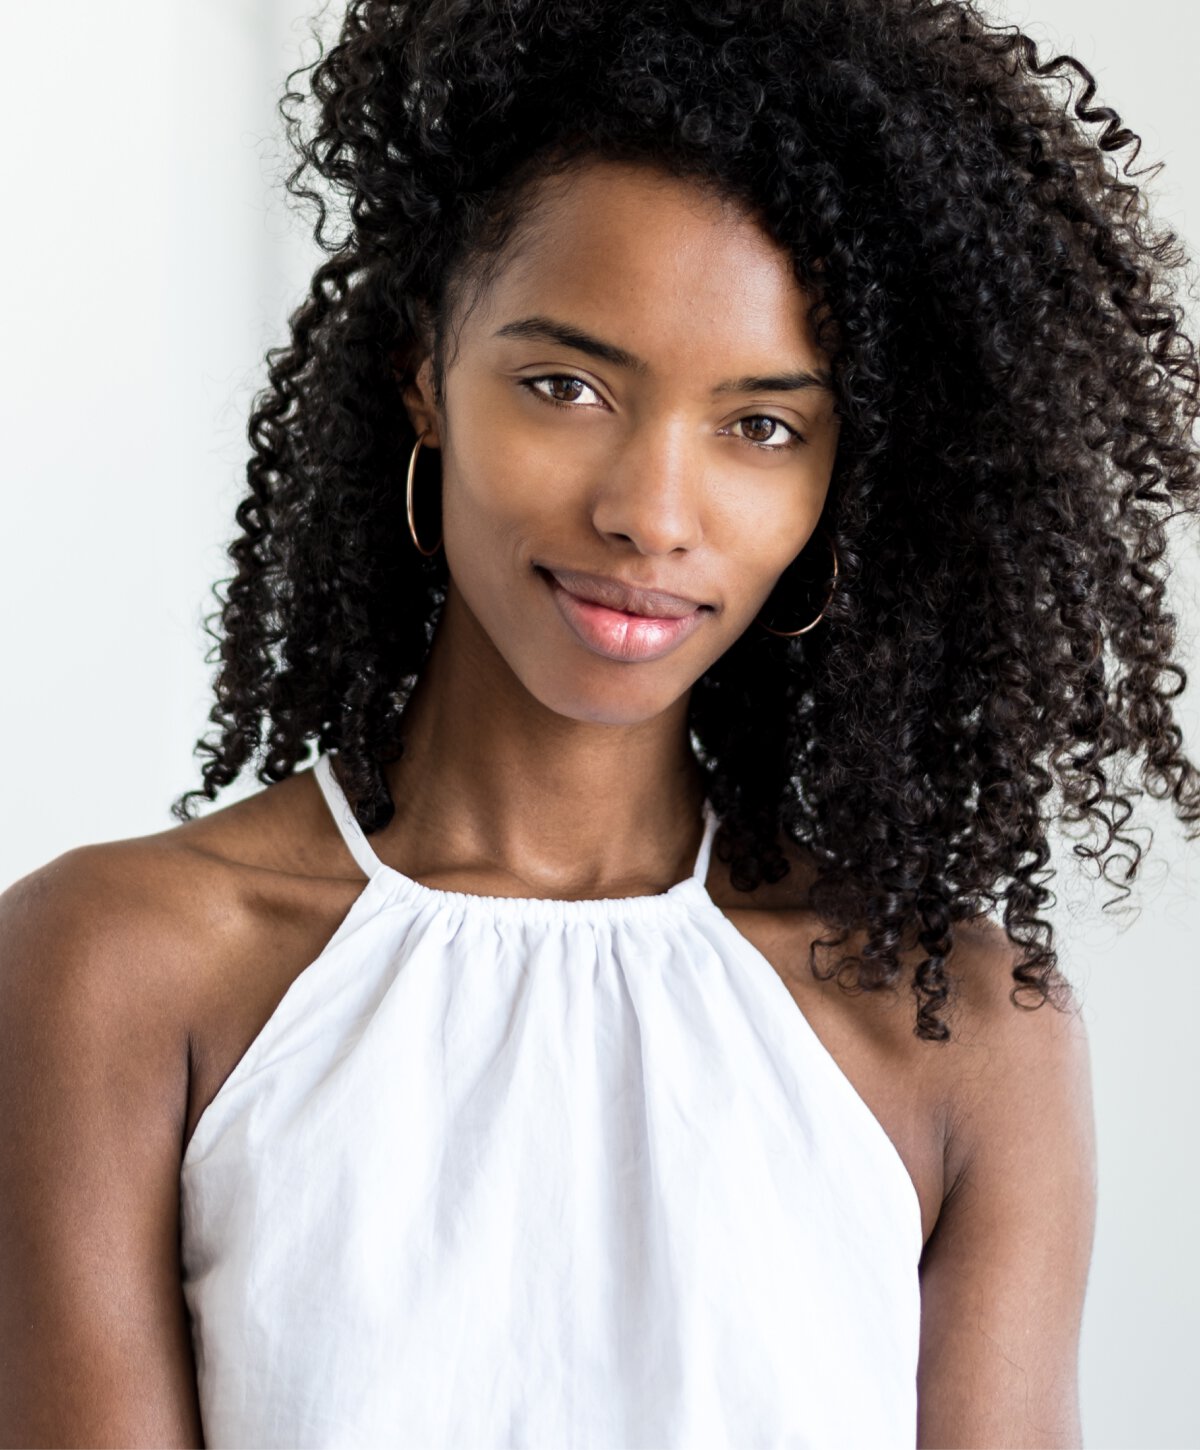 Northern VA skin treatment model with curly hair